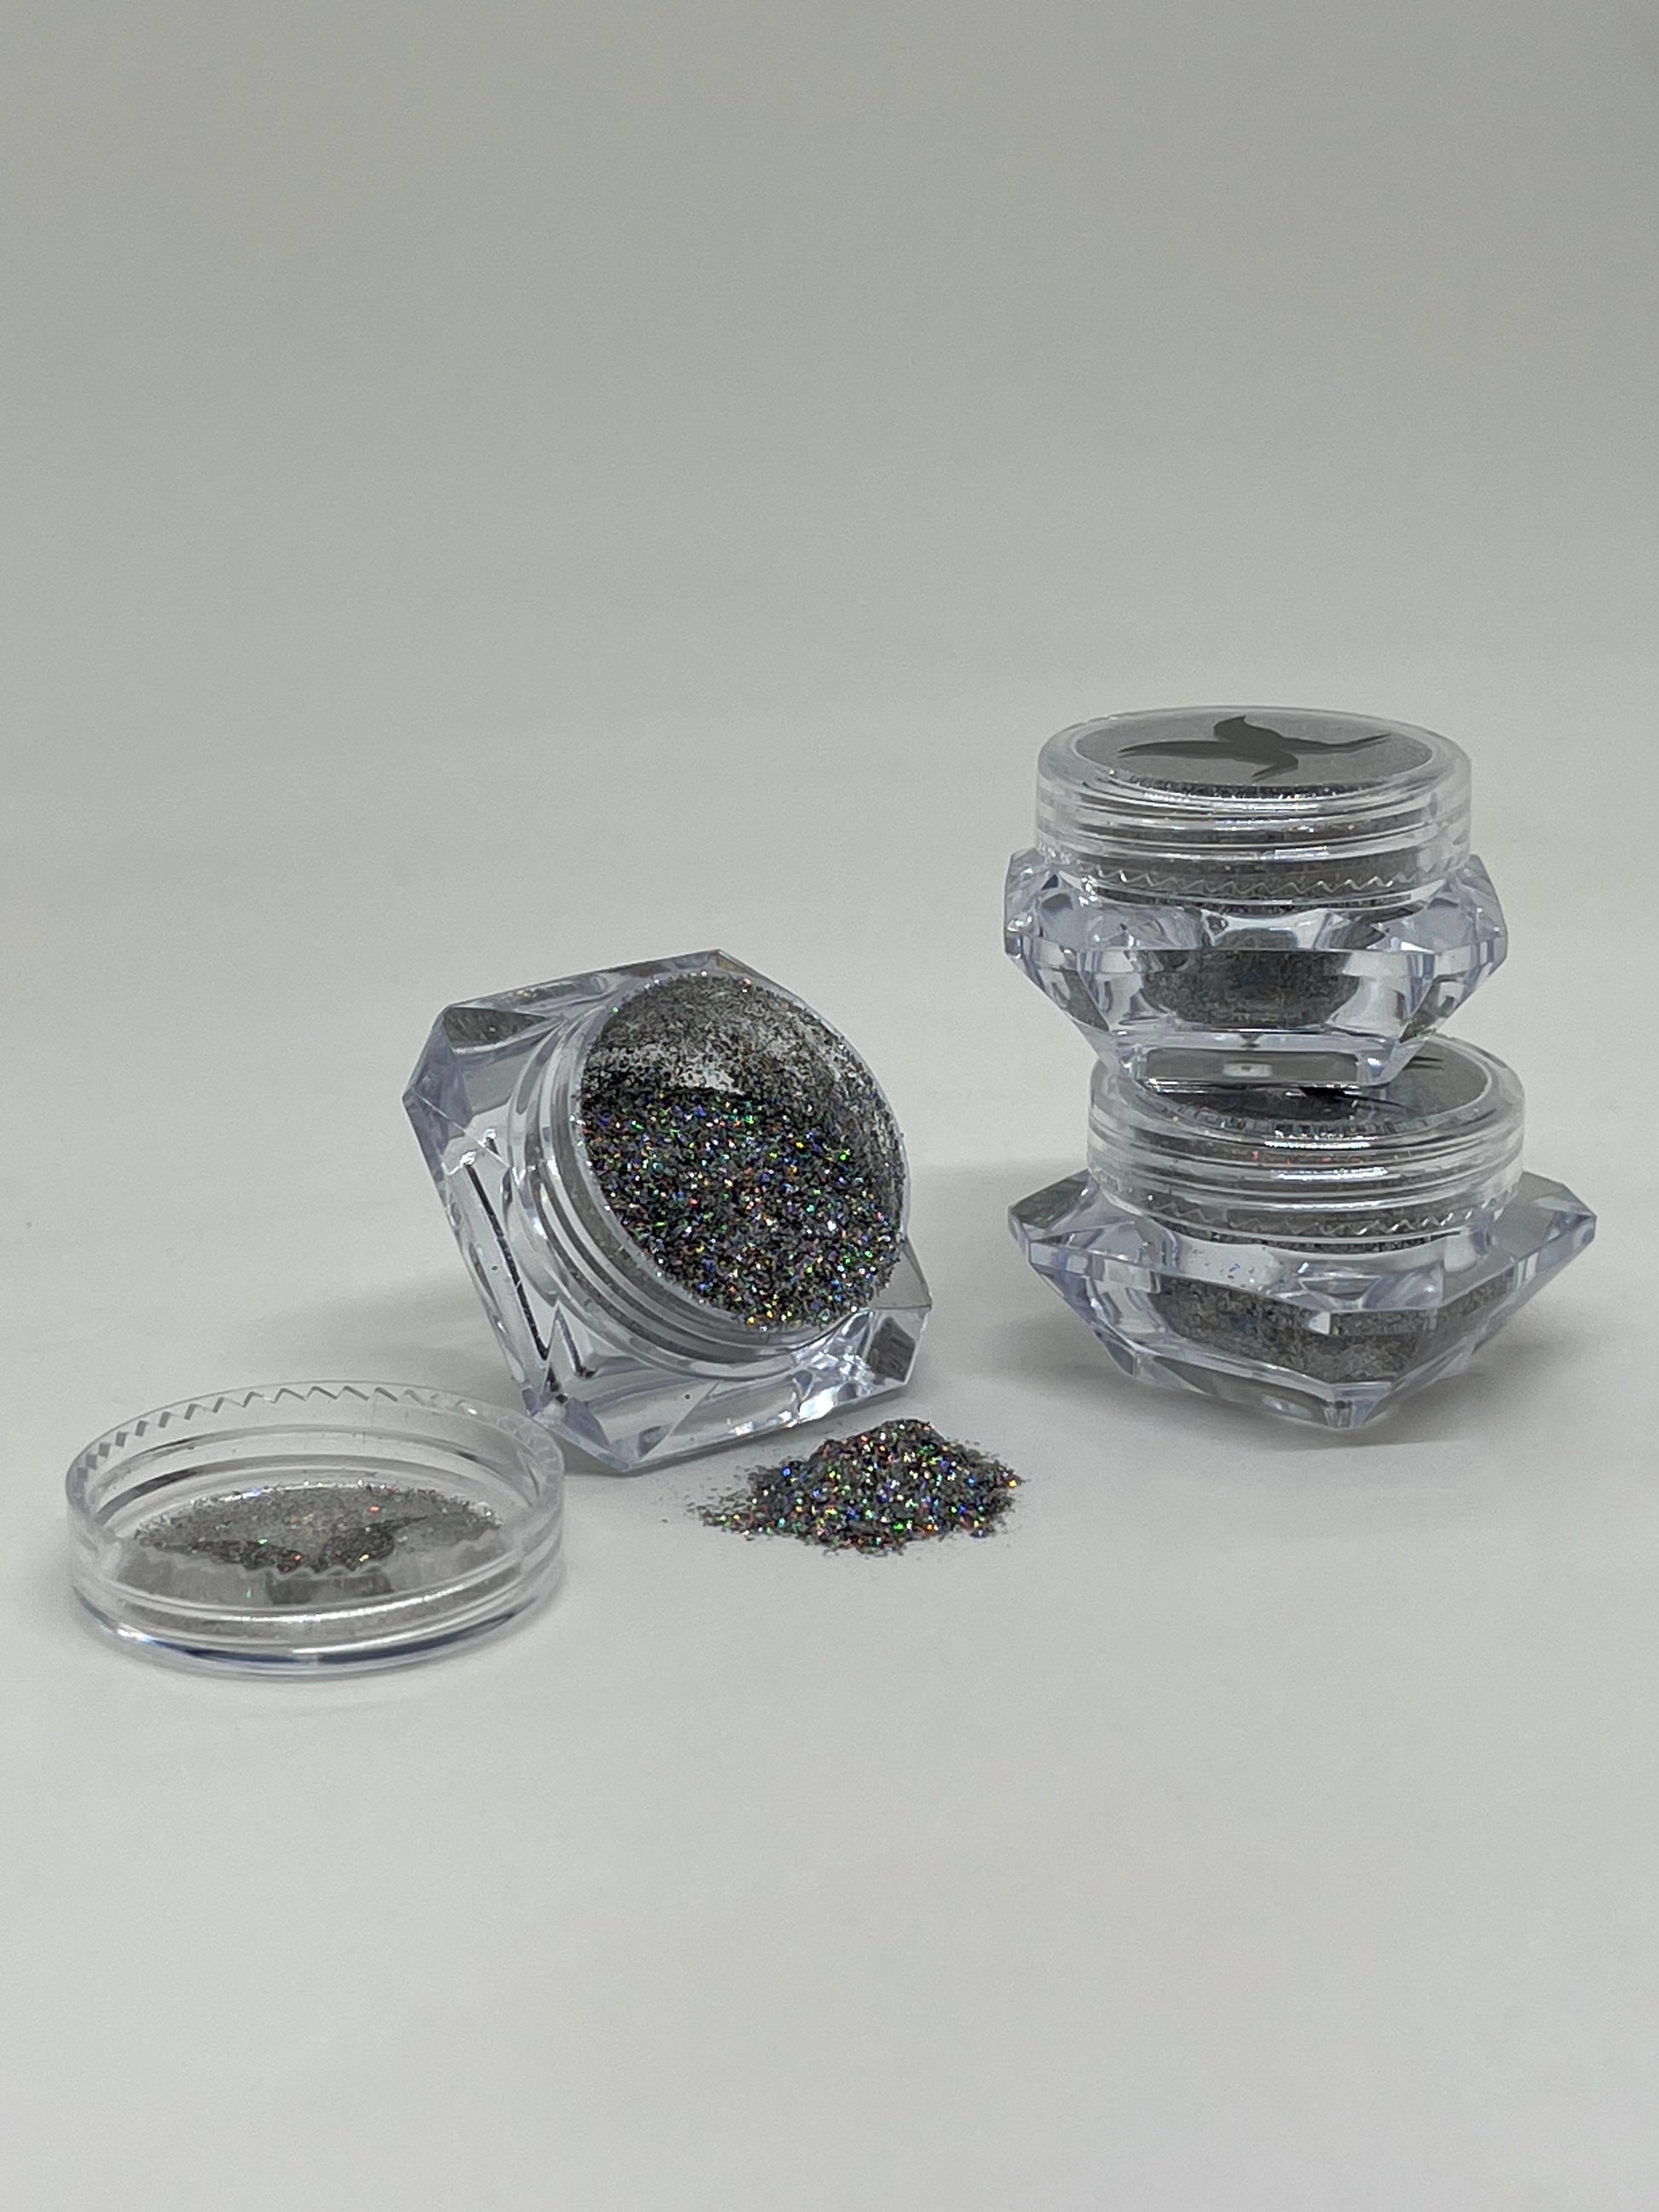 Silver Holographic Cosmetic Glitter Silver Prism, 10 Gram Jar